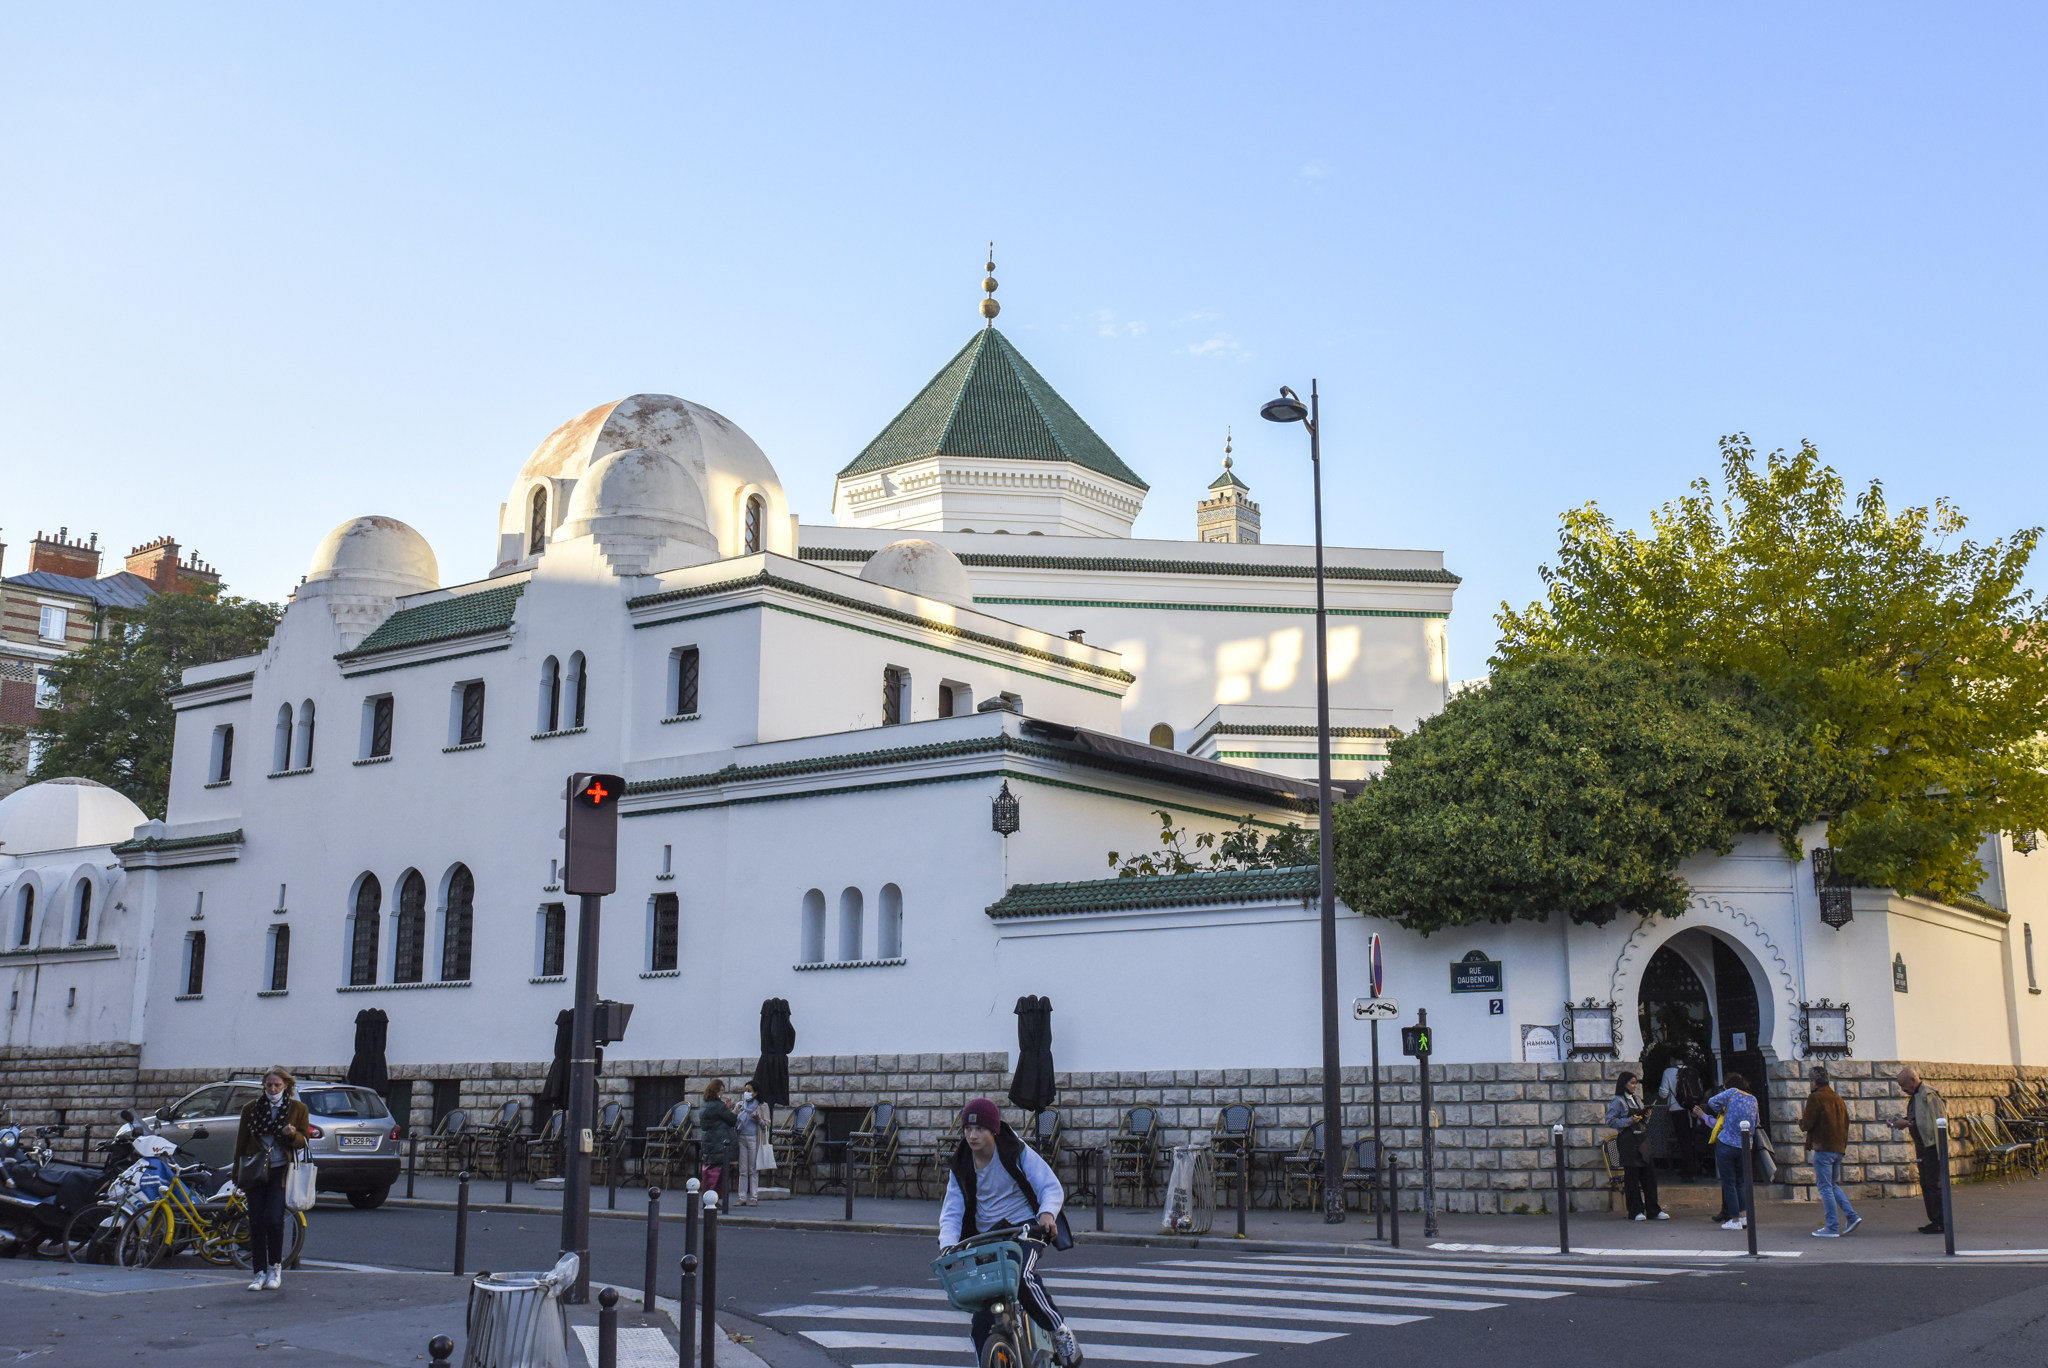 The Grand Mosque of Paris is one of the city’s lesser-known attractions. We look at this and other alternative tourist spots for visitors to the French capital looking to avoid the crowds during the 2024 Summer Olympics. Photo: Ronan O’Connell